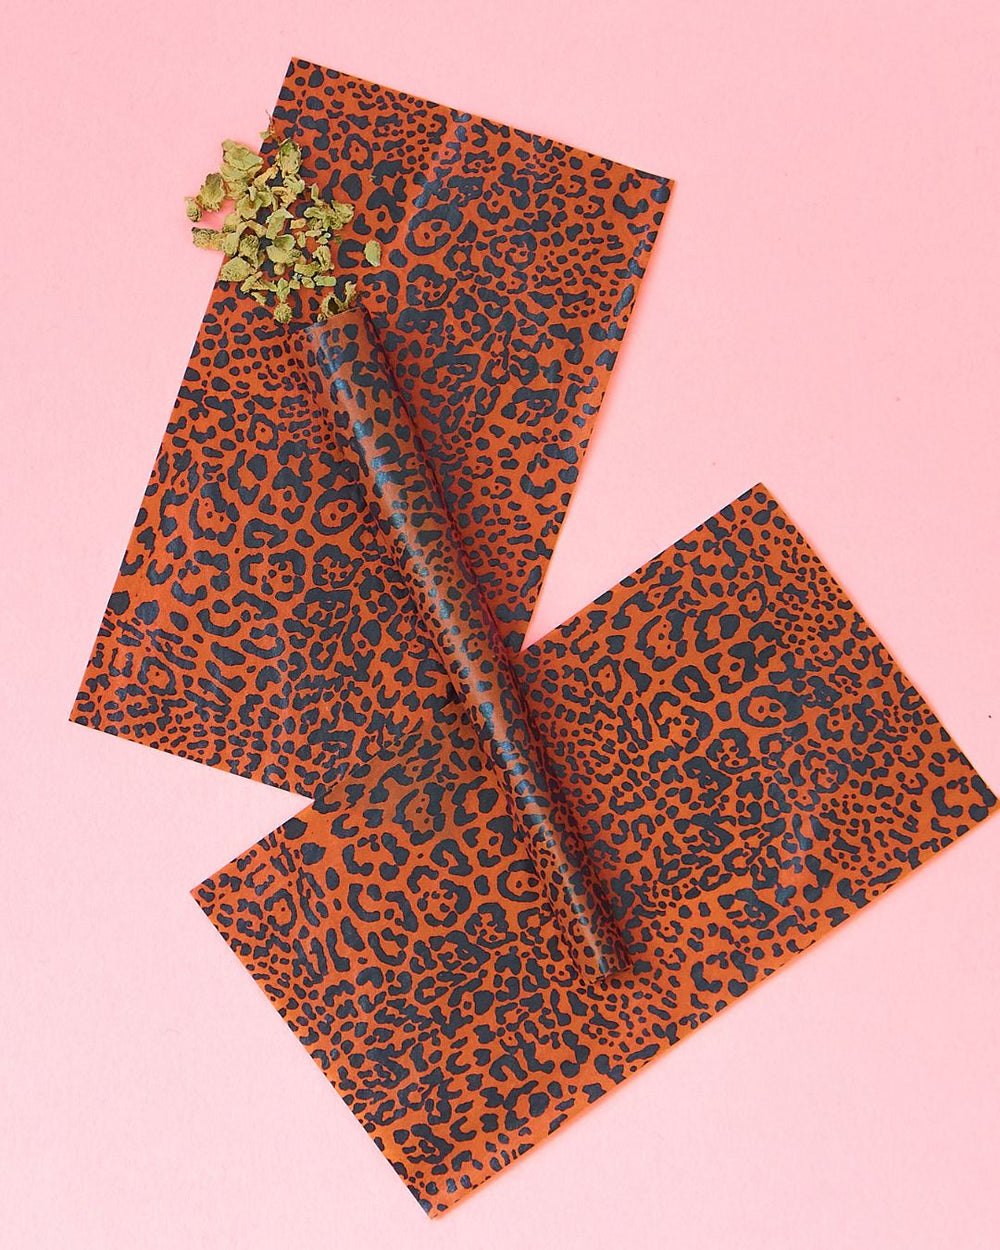 Leopard print rolling papers with joint and buds on a pink background.